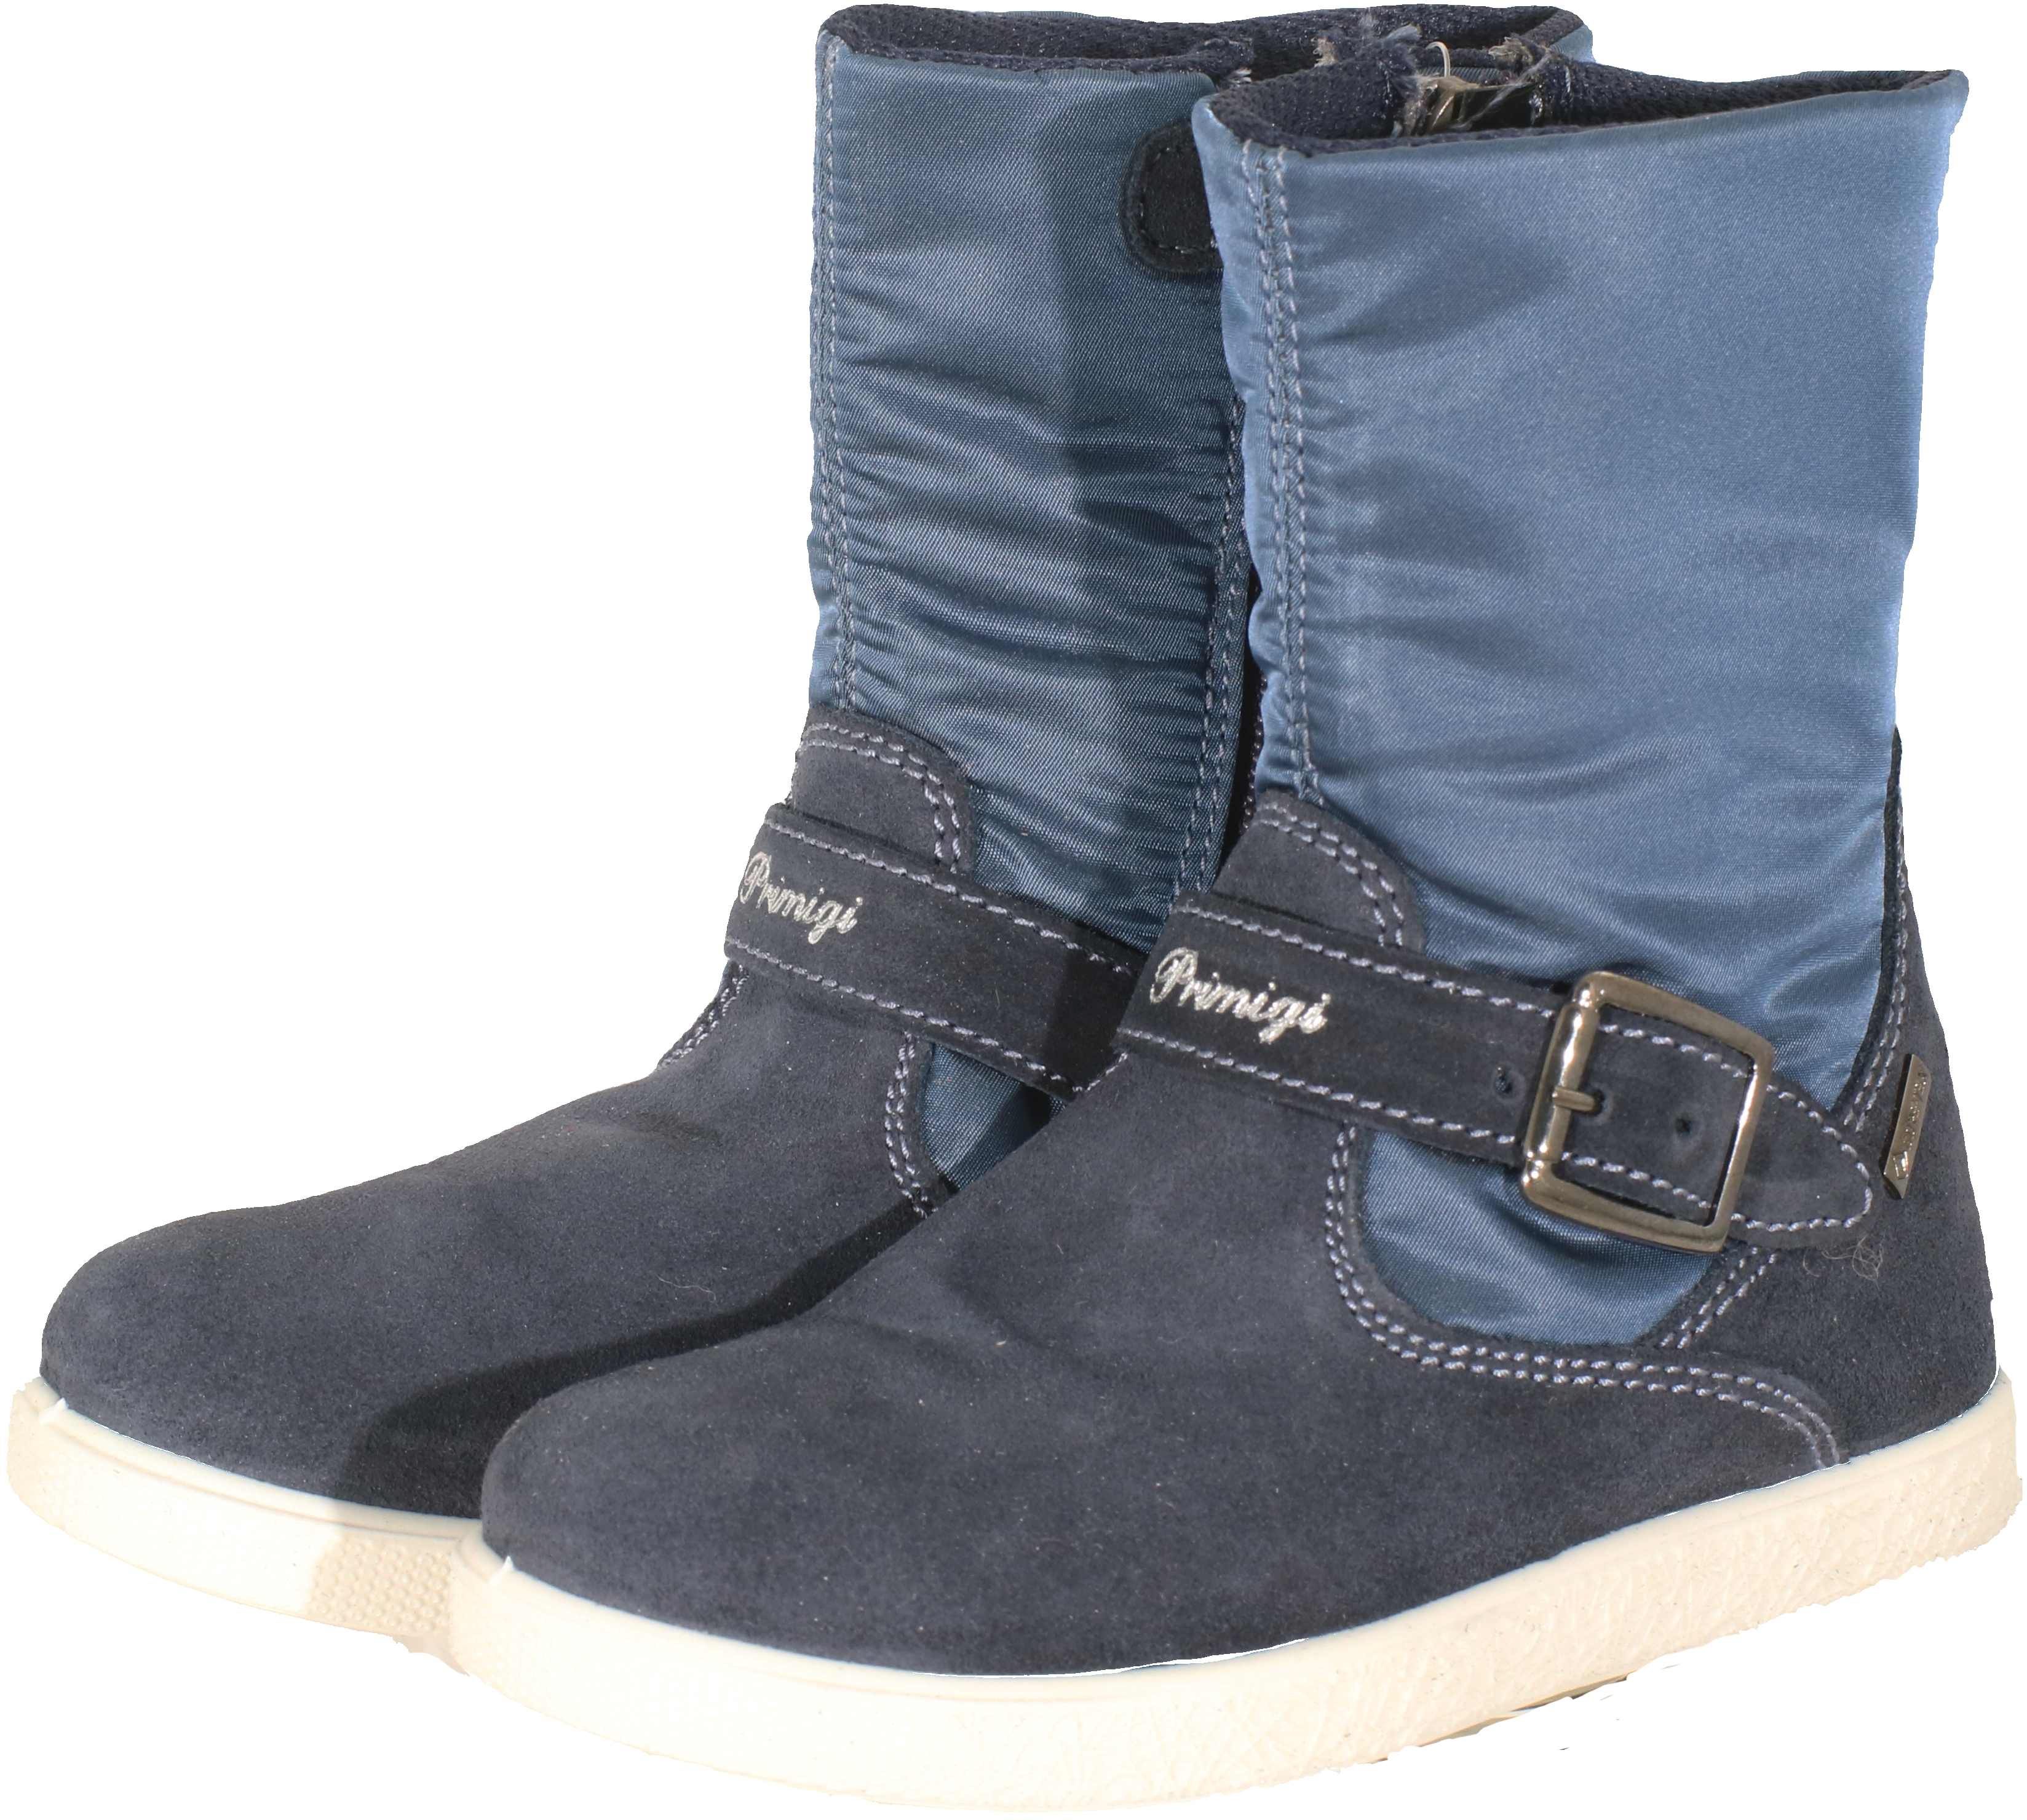 63771 - Navy / Jeans Suede